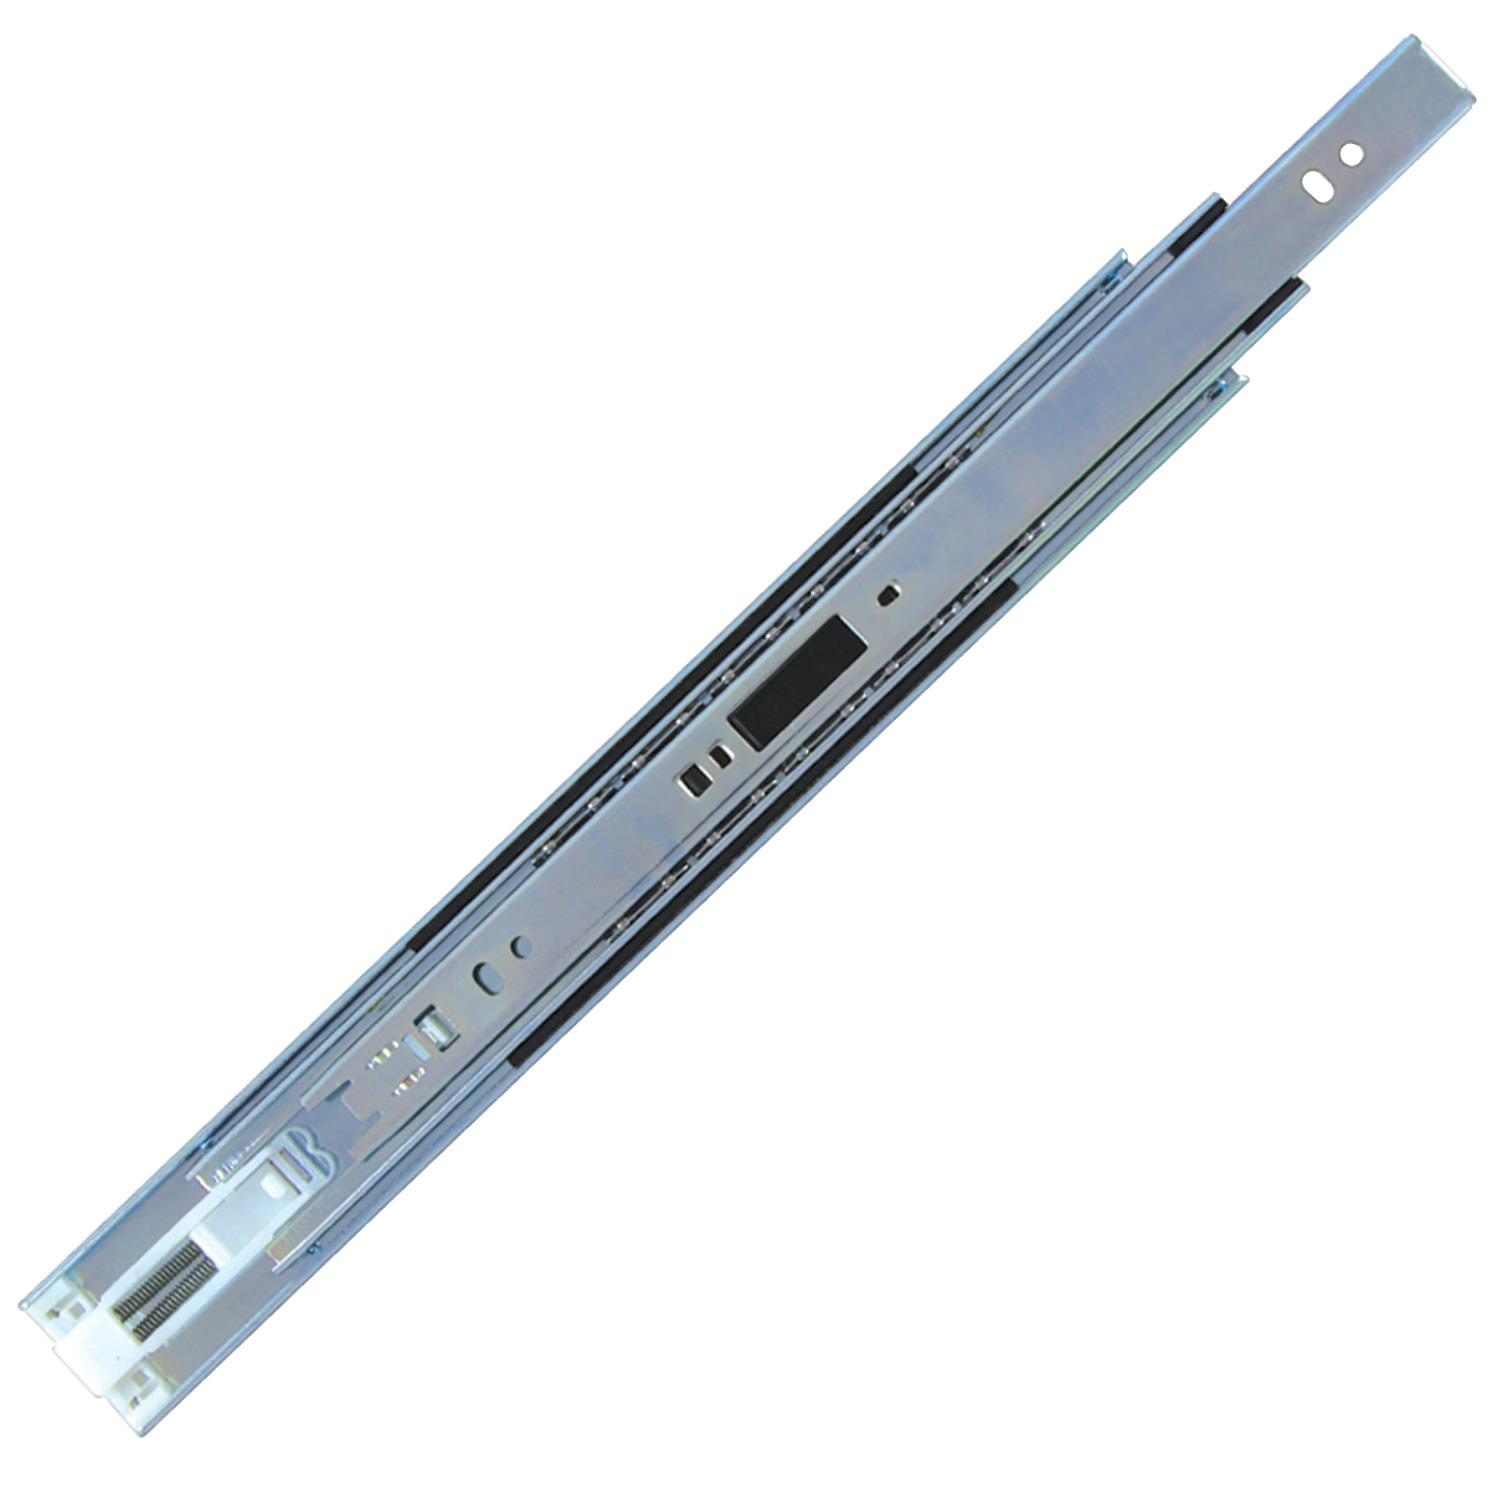 P4050.AC0450 Drawer Slide Full Extn Length 450; Load 30kg per pair. Sold Individually. Lever Disconnect; Soft Close